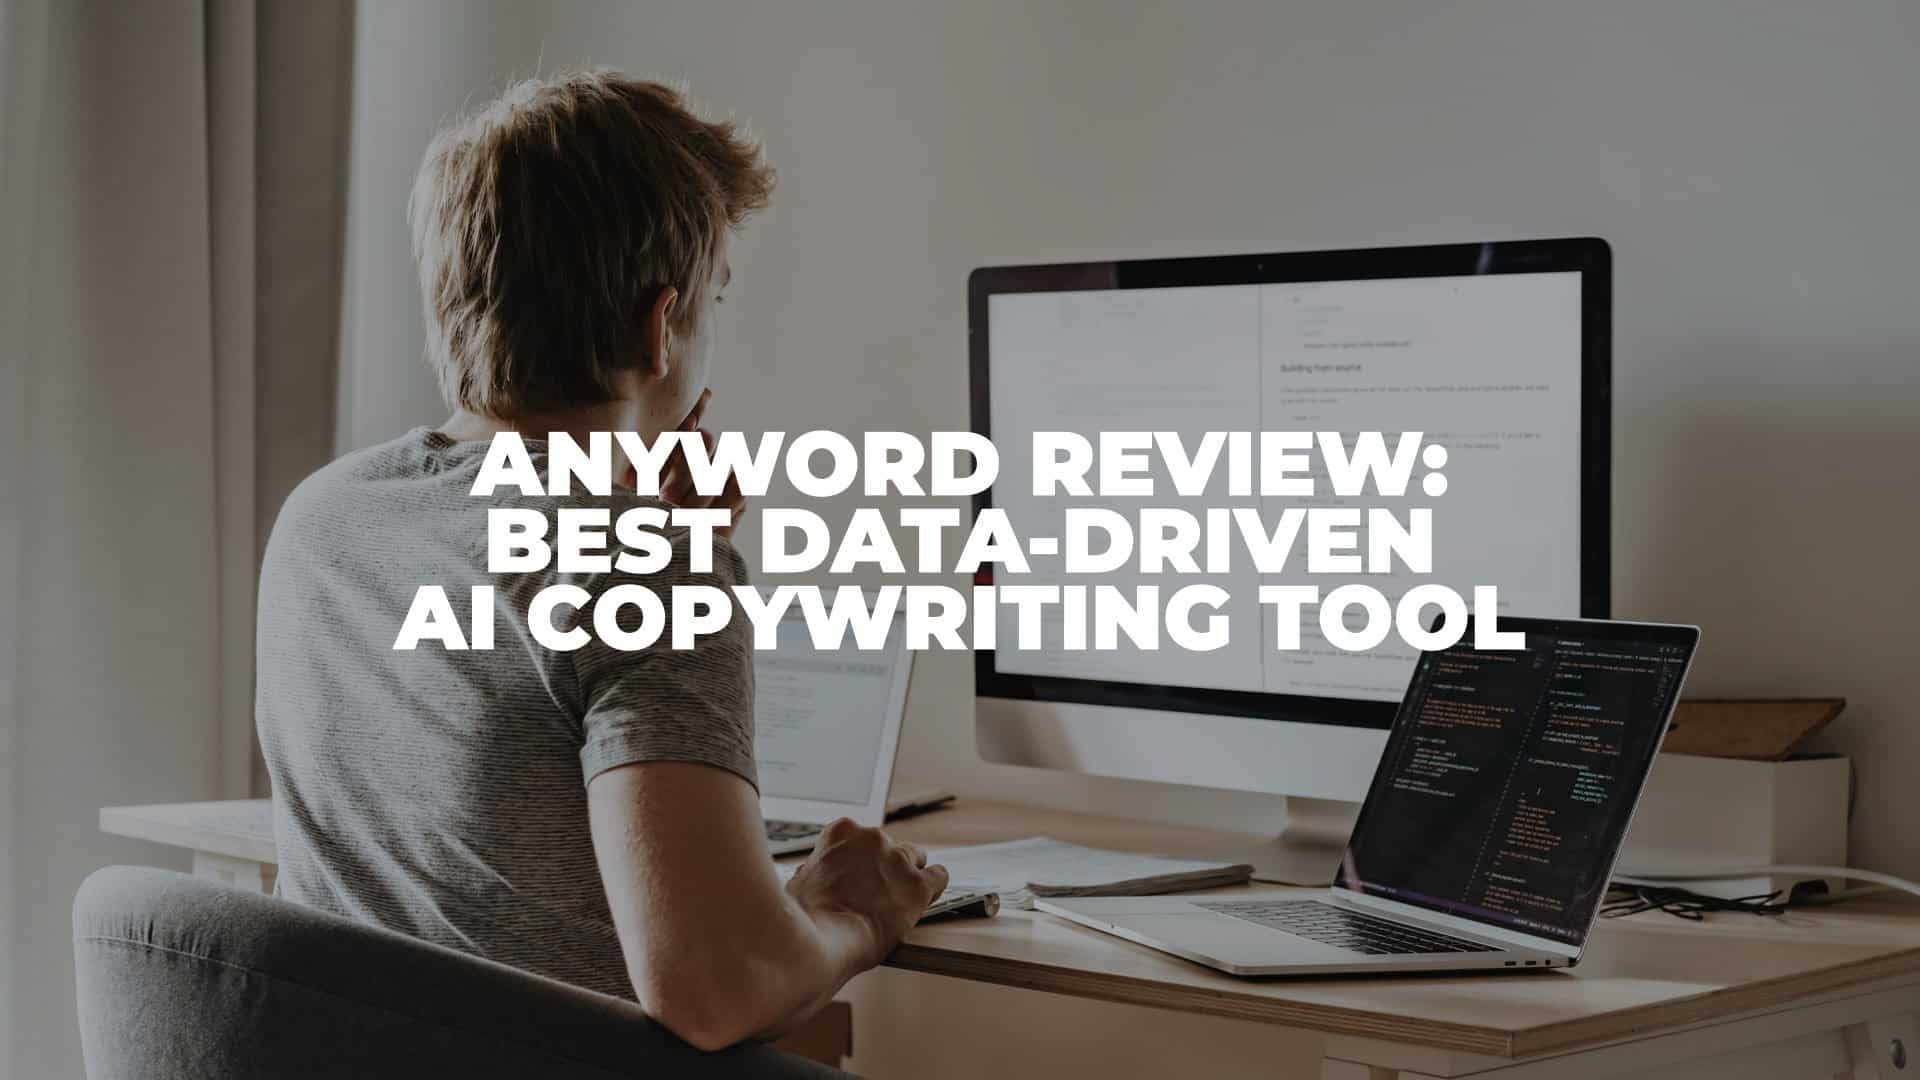 Anyword Review - Featured Image